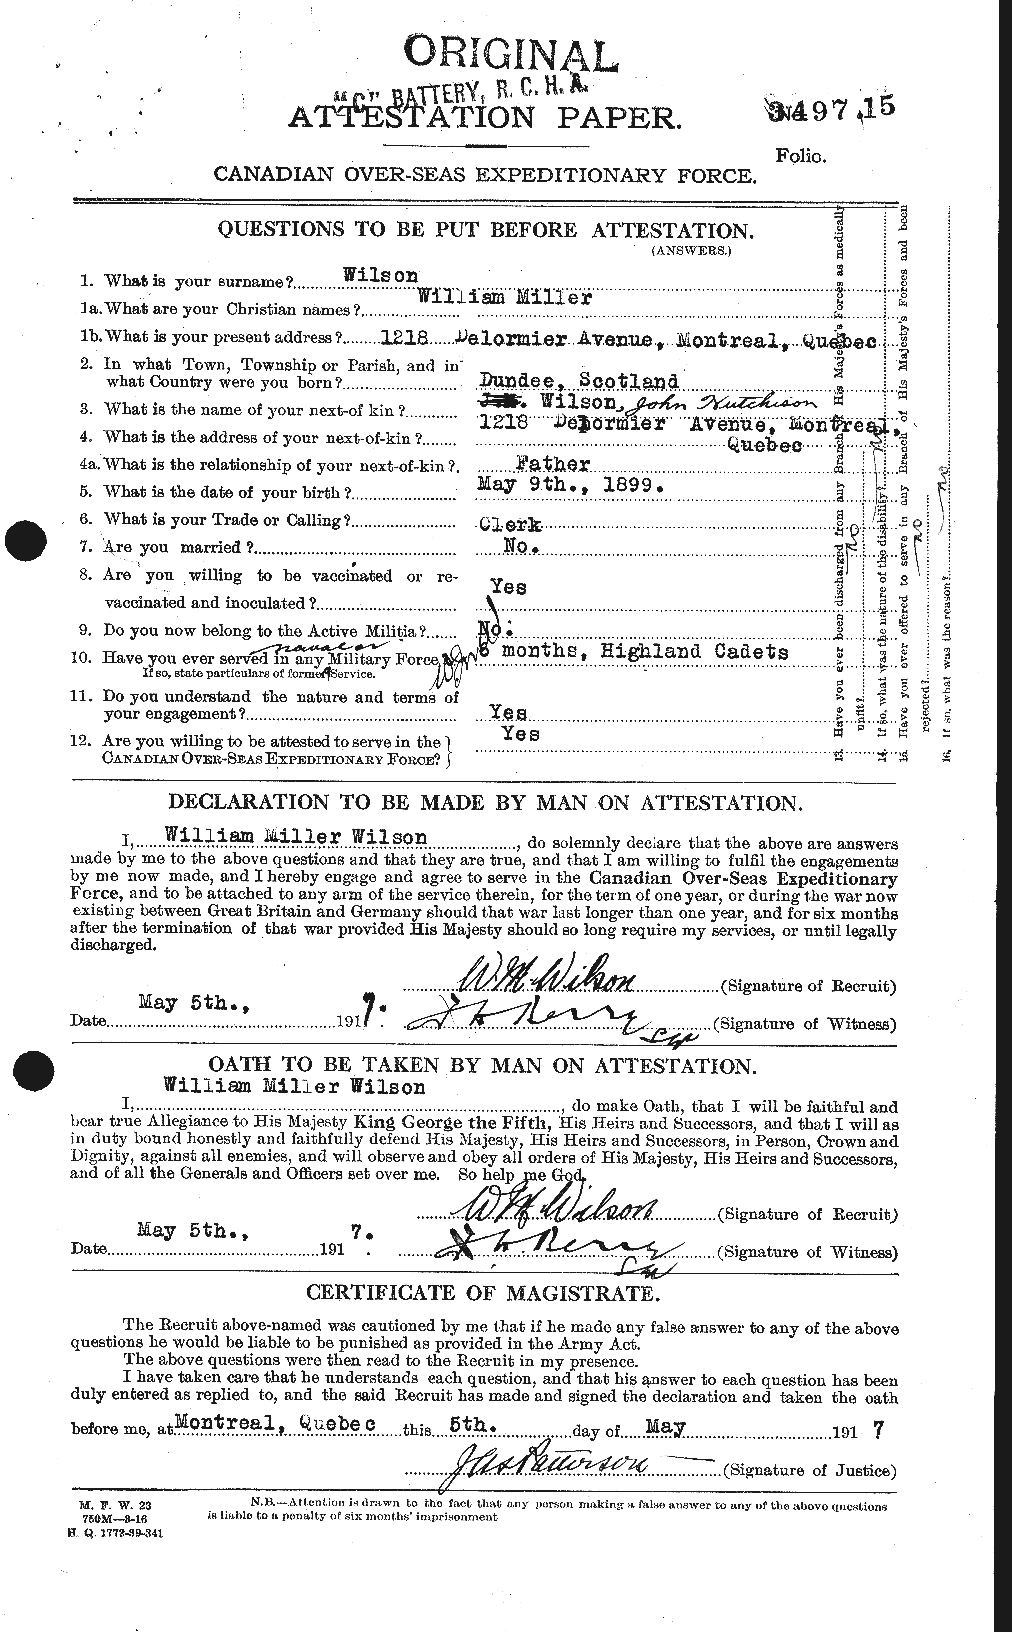 Personnel Records of the First World War - CEF 684079a